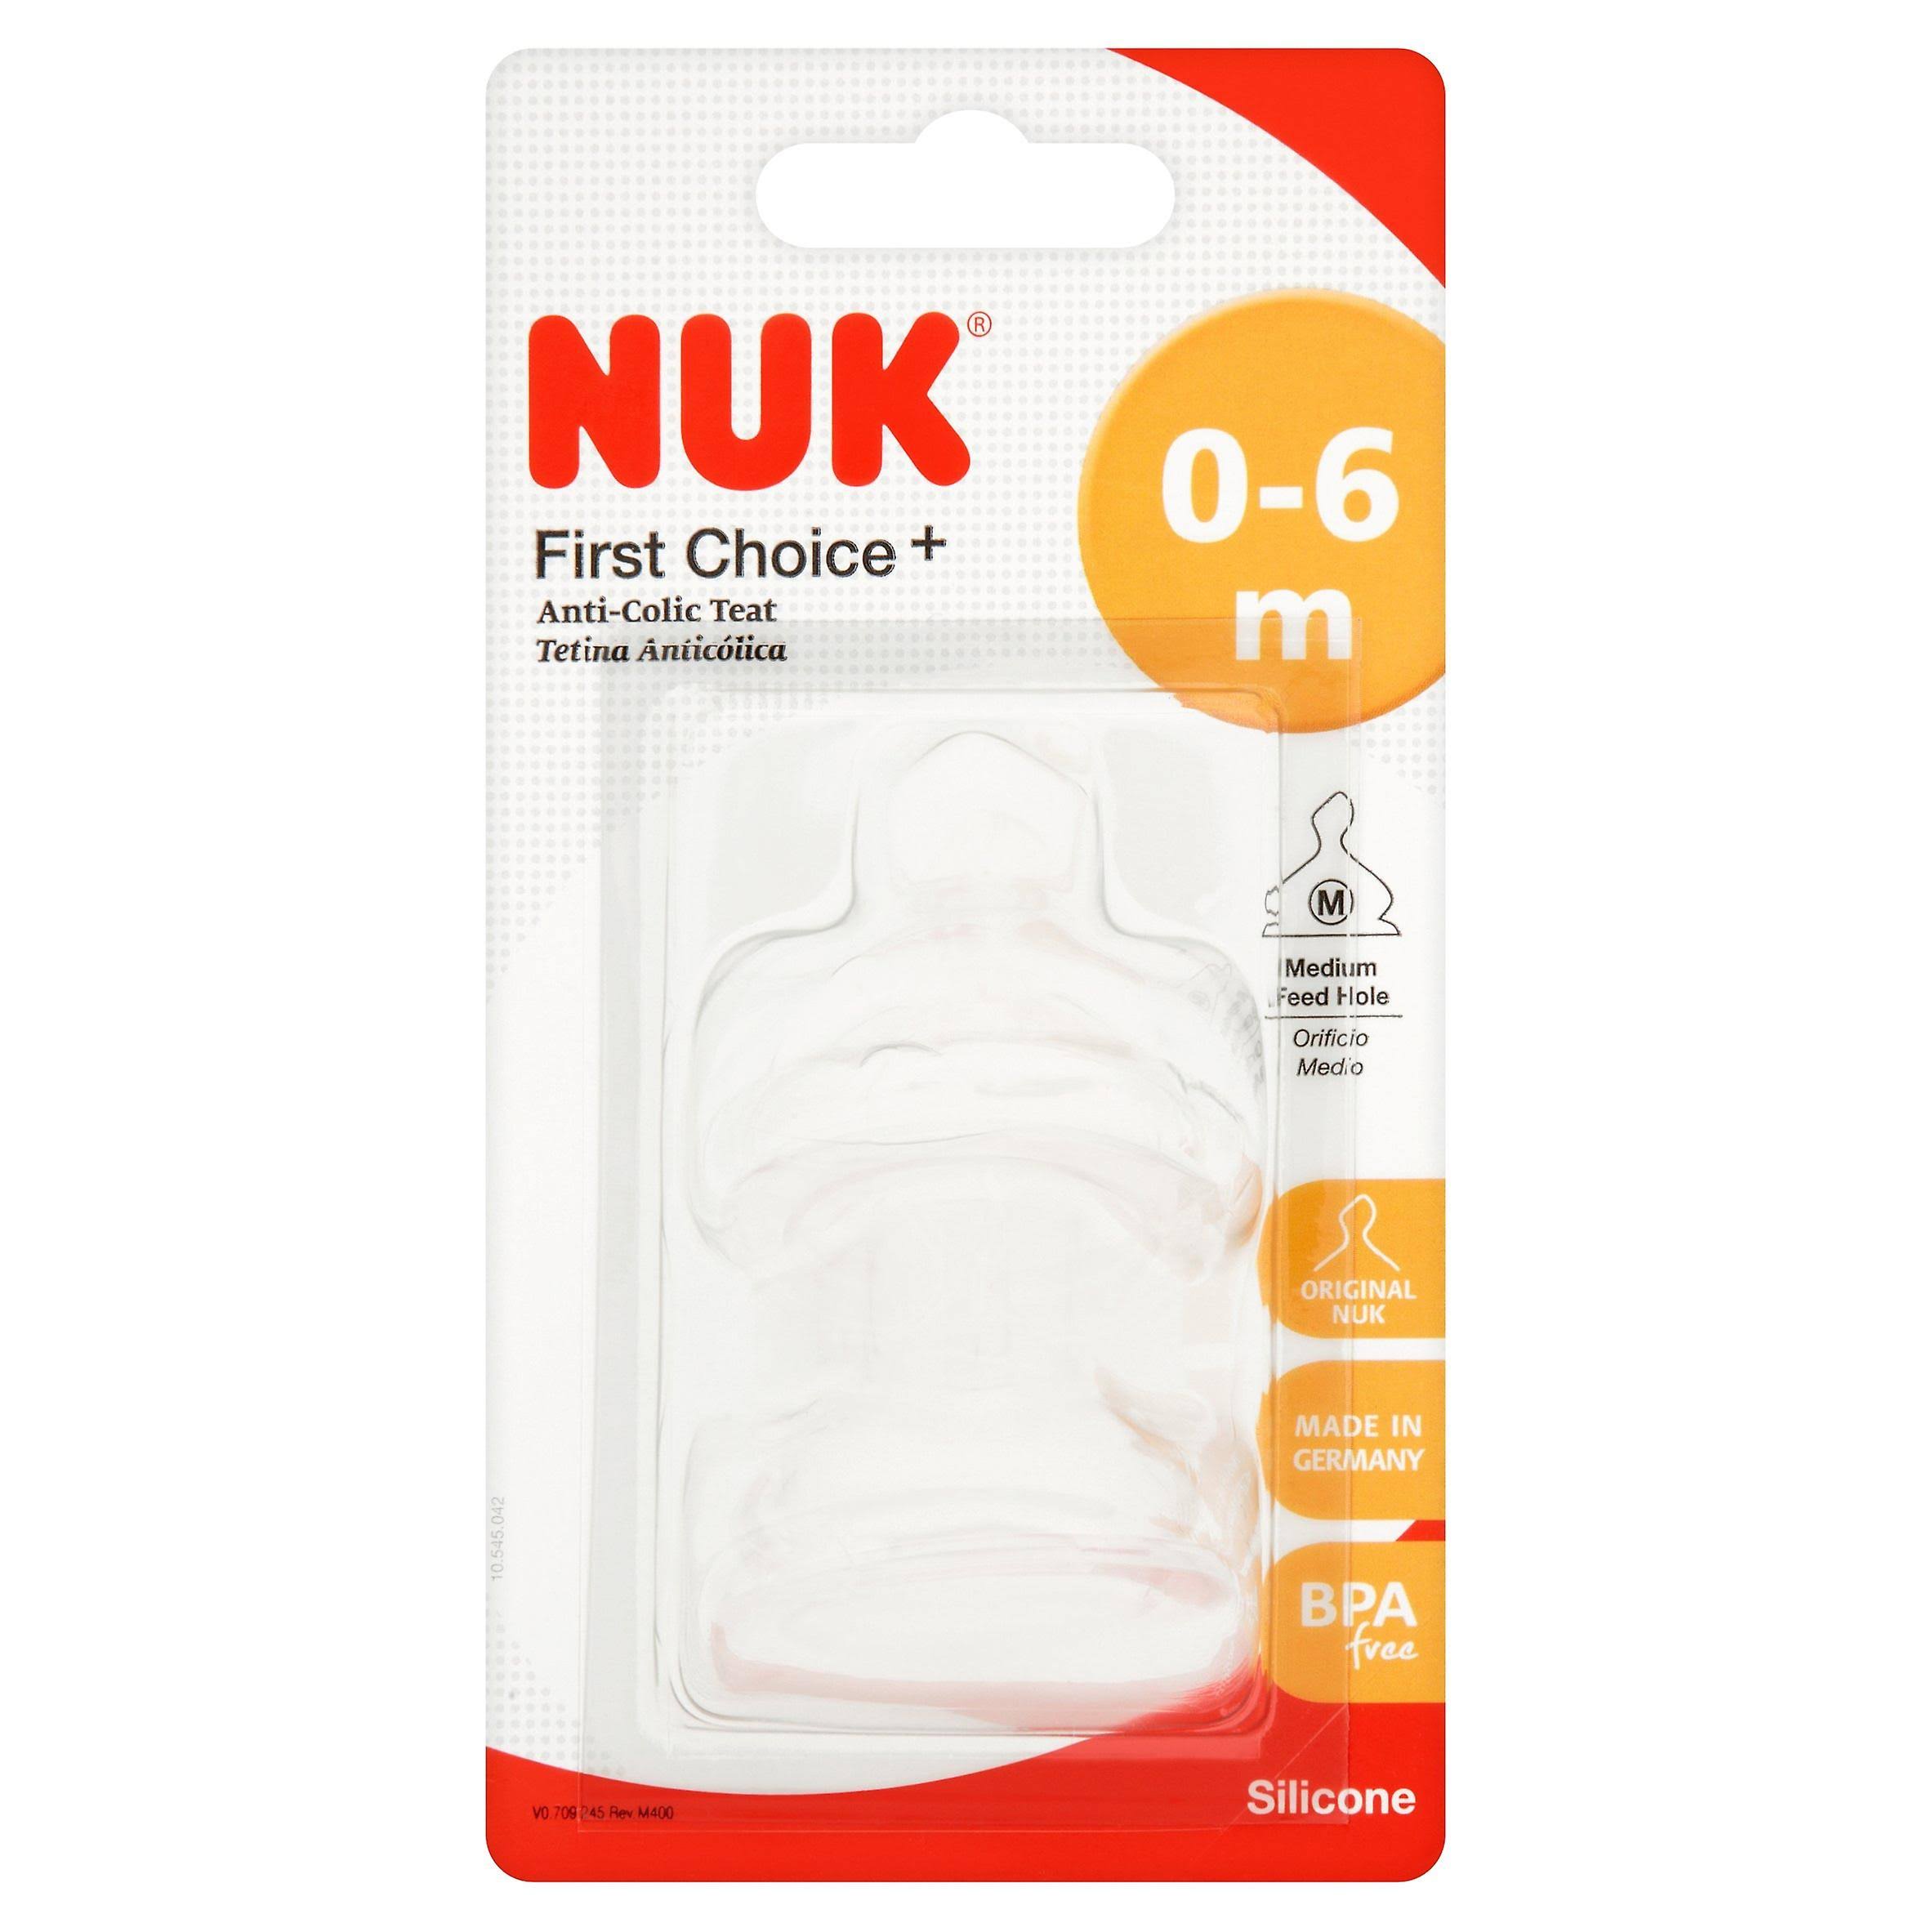 Nuk First Choice Wide Silicone Teat - Size 1, 0-6 Months, Medium